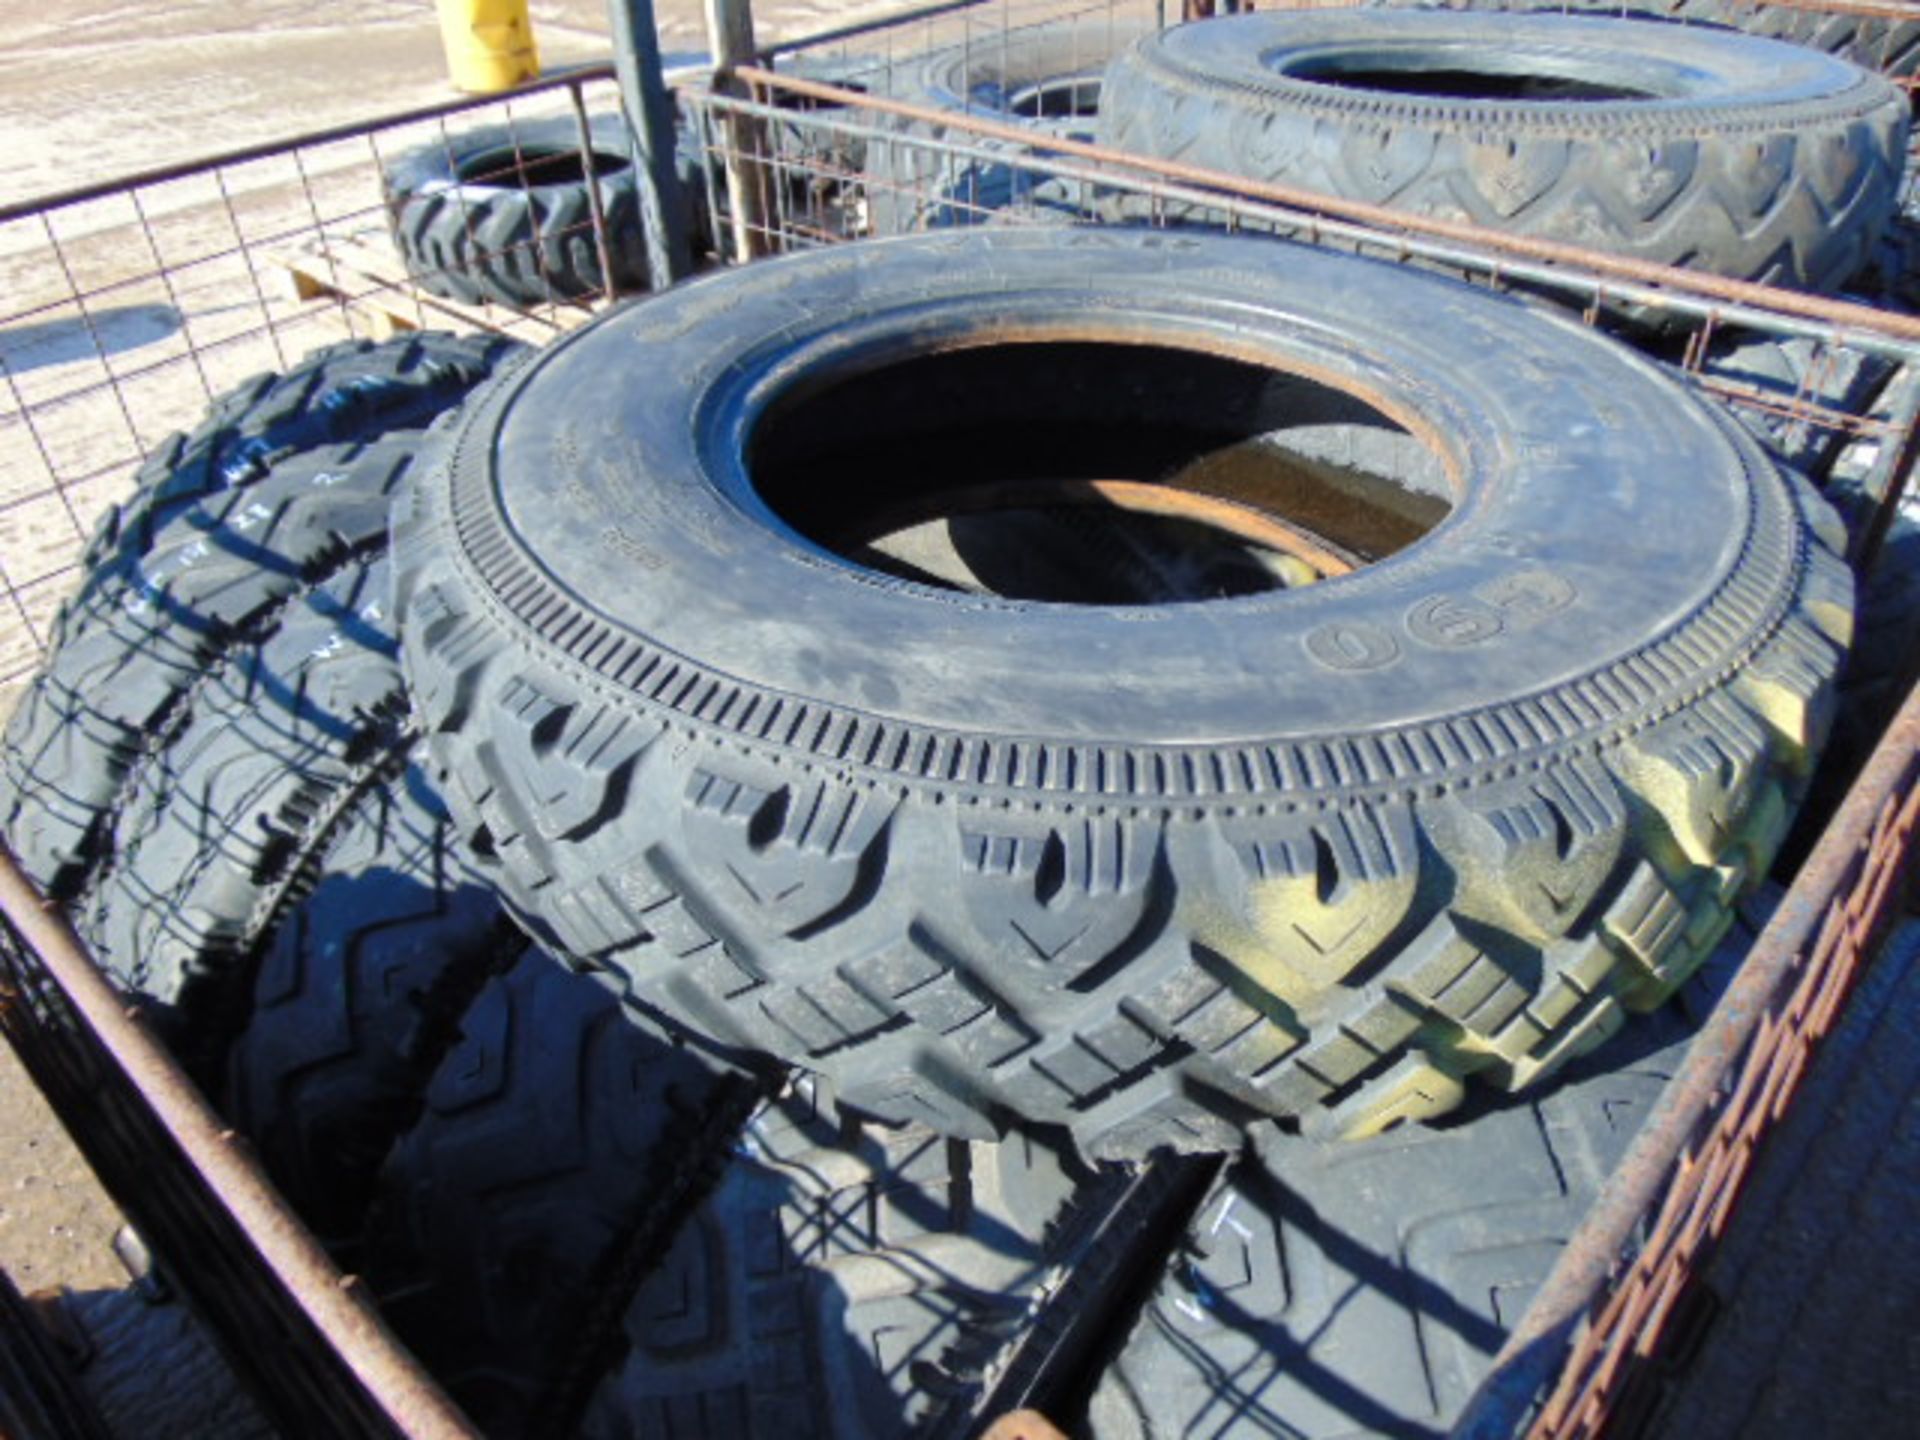 45 x Goodyear G90 7.50 R16 Tyres - Image 4 of 9